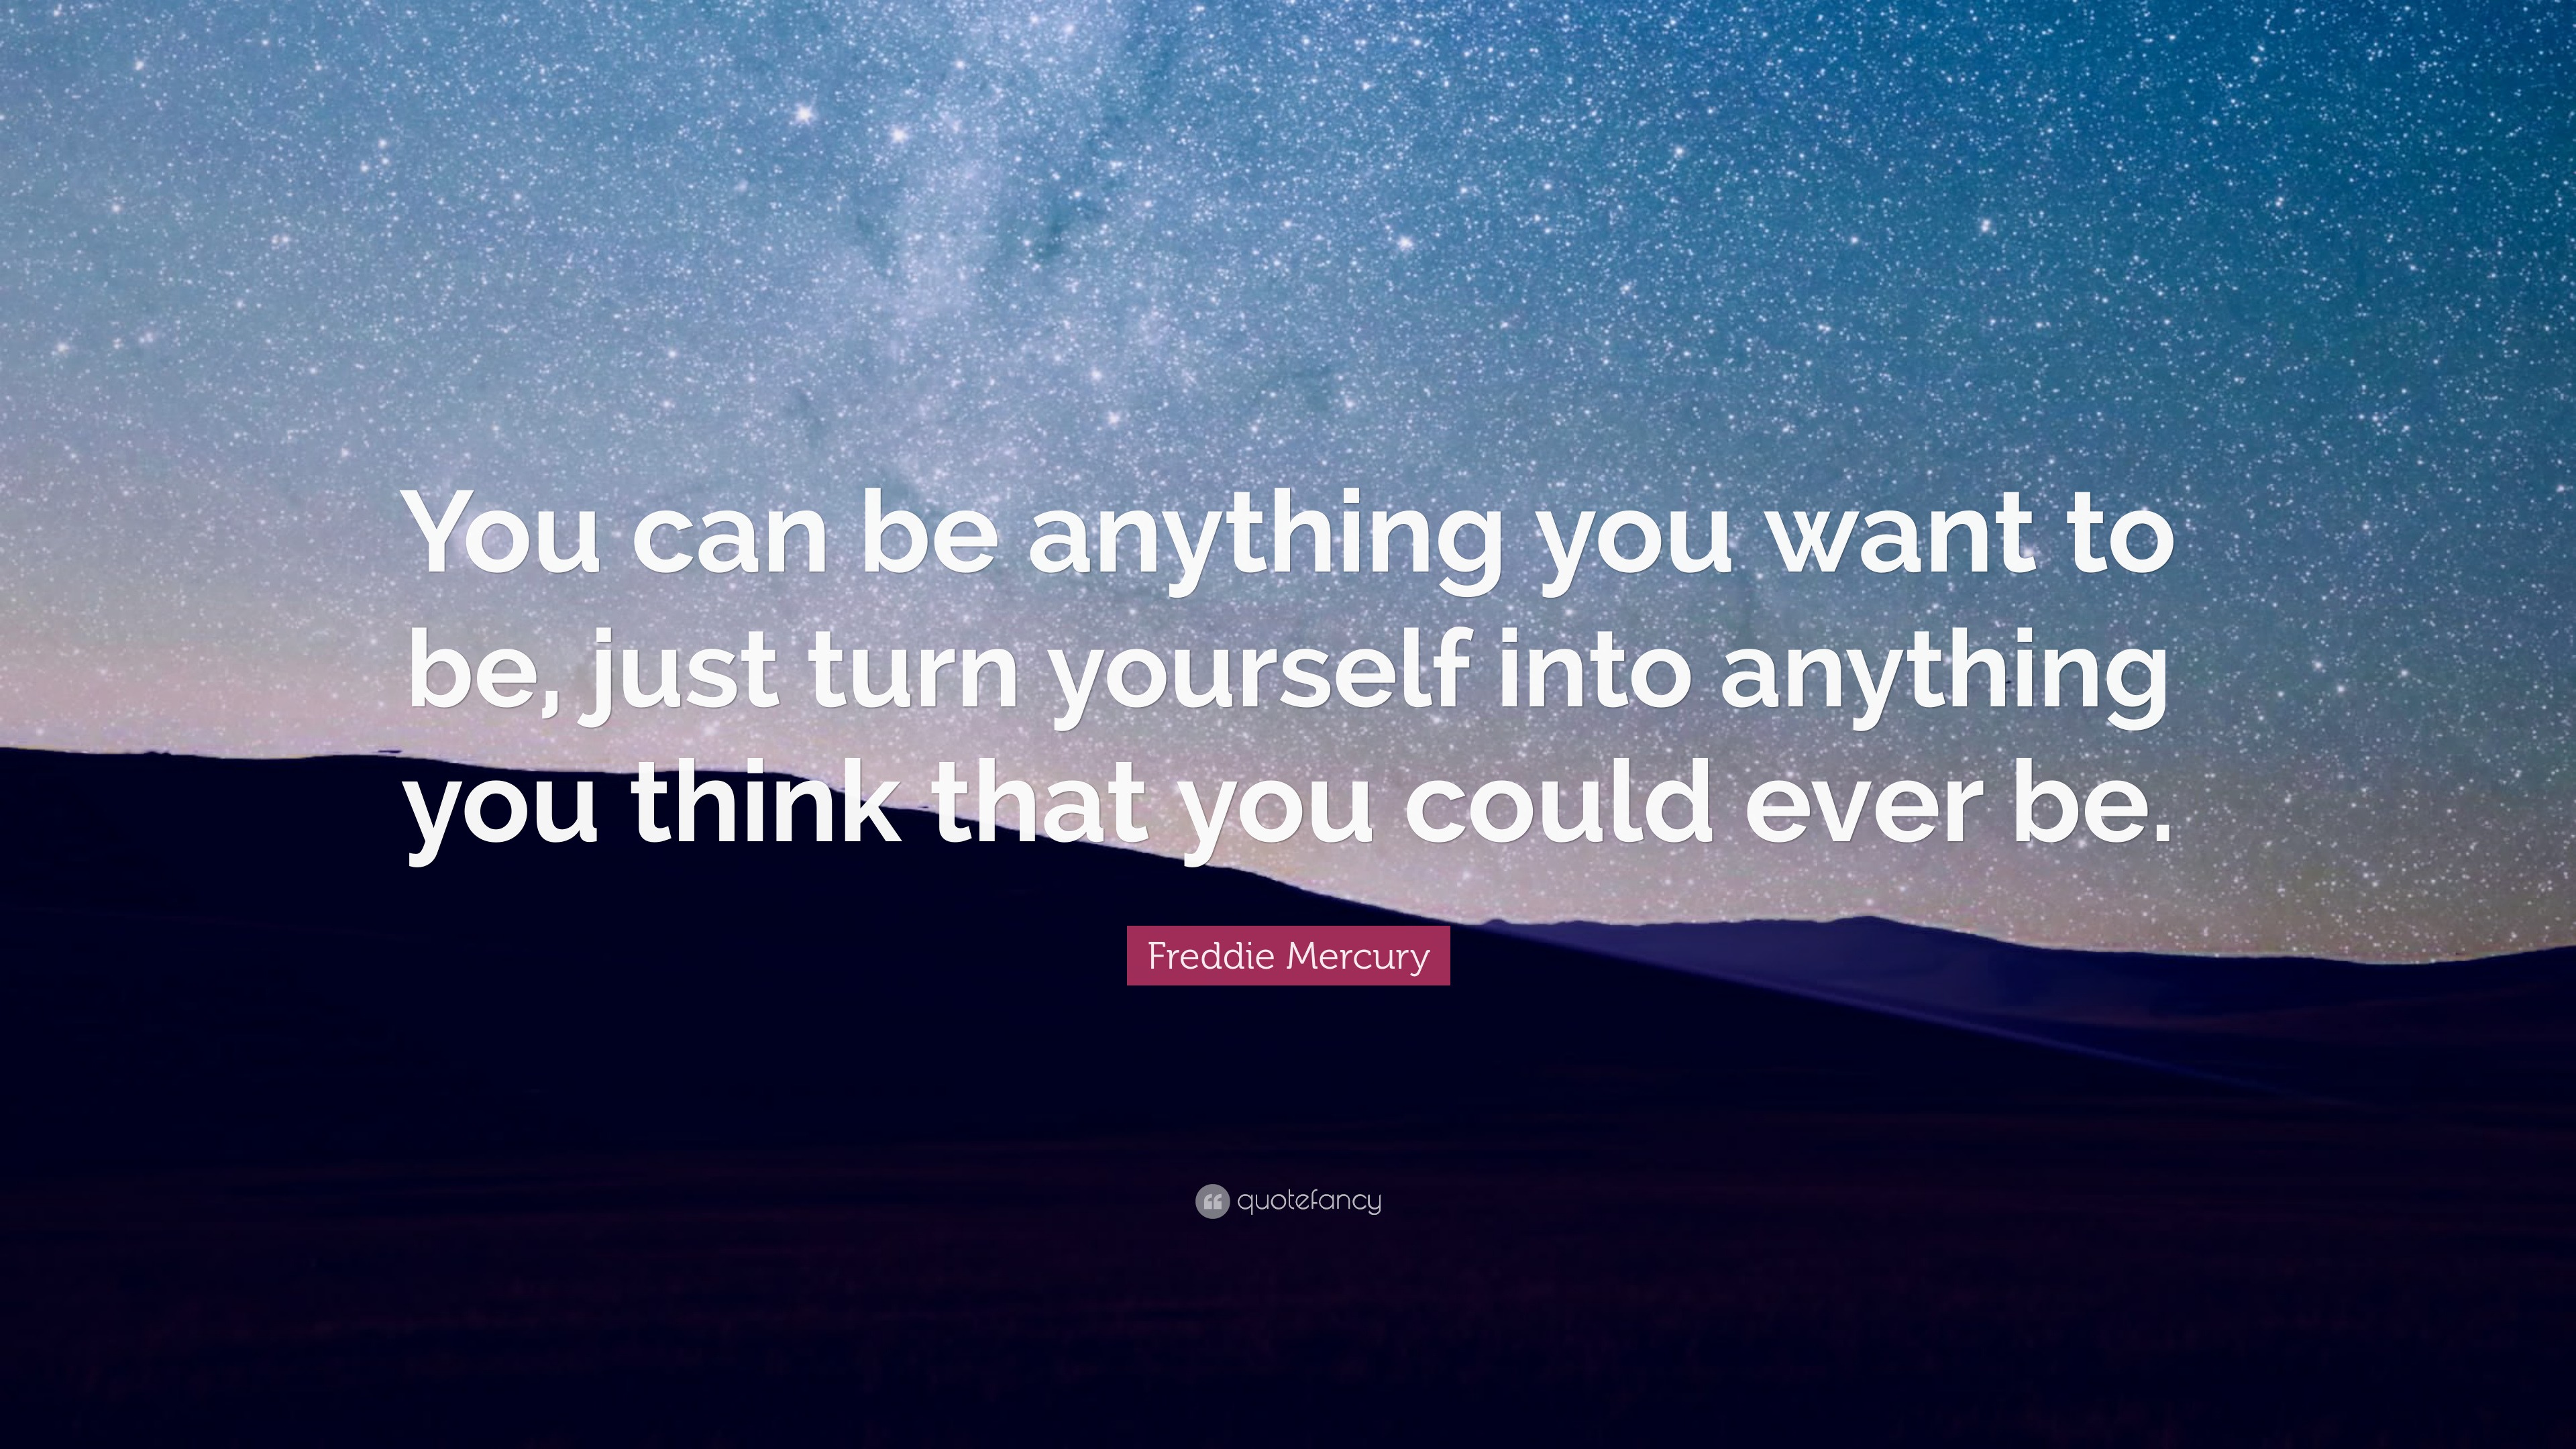 Freddie Mercury Quote: “You can be anything you want to be, just turn